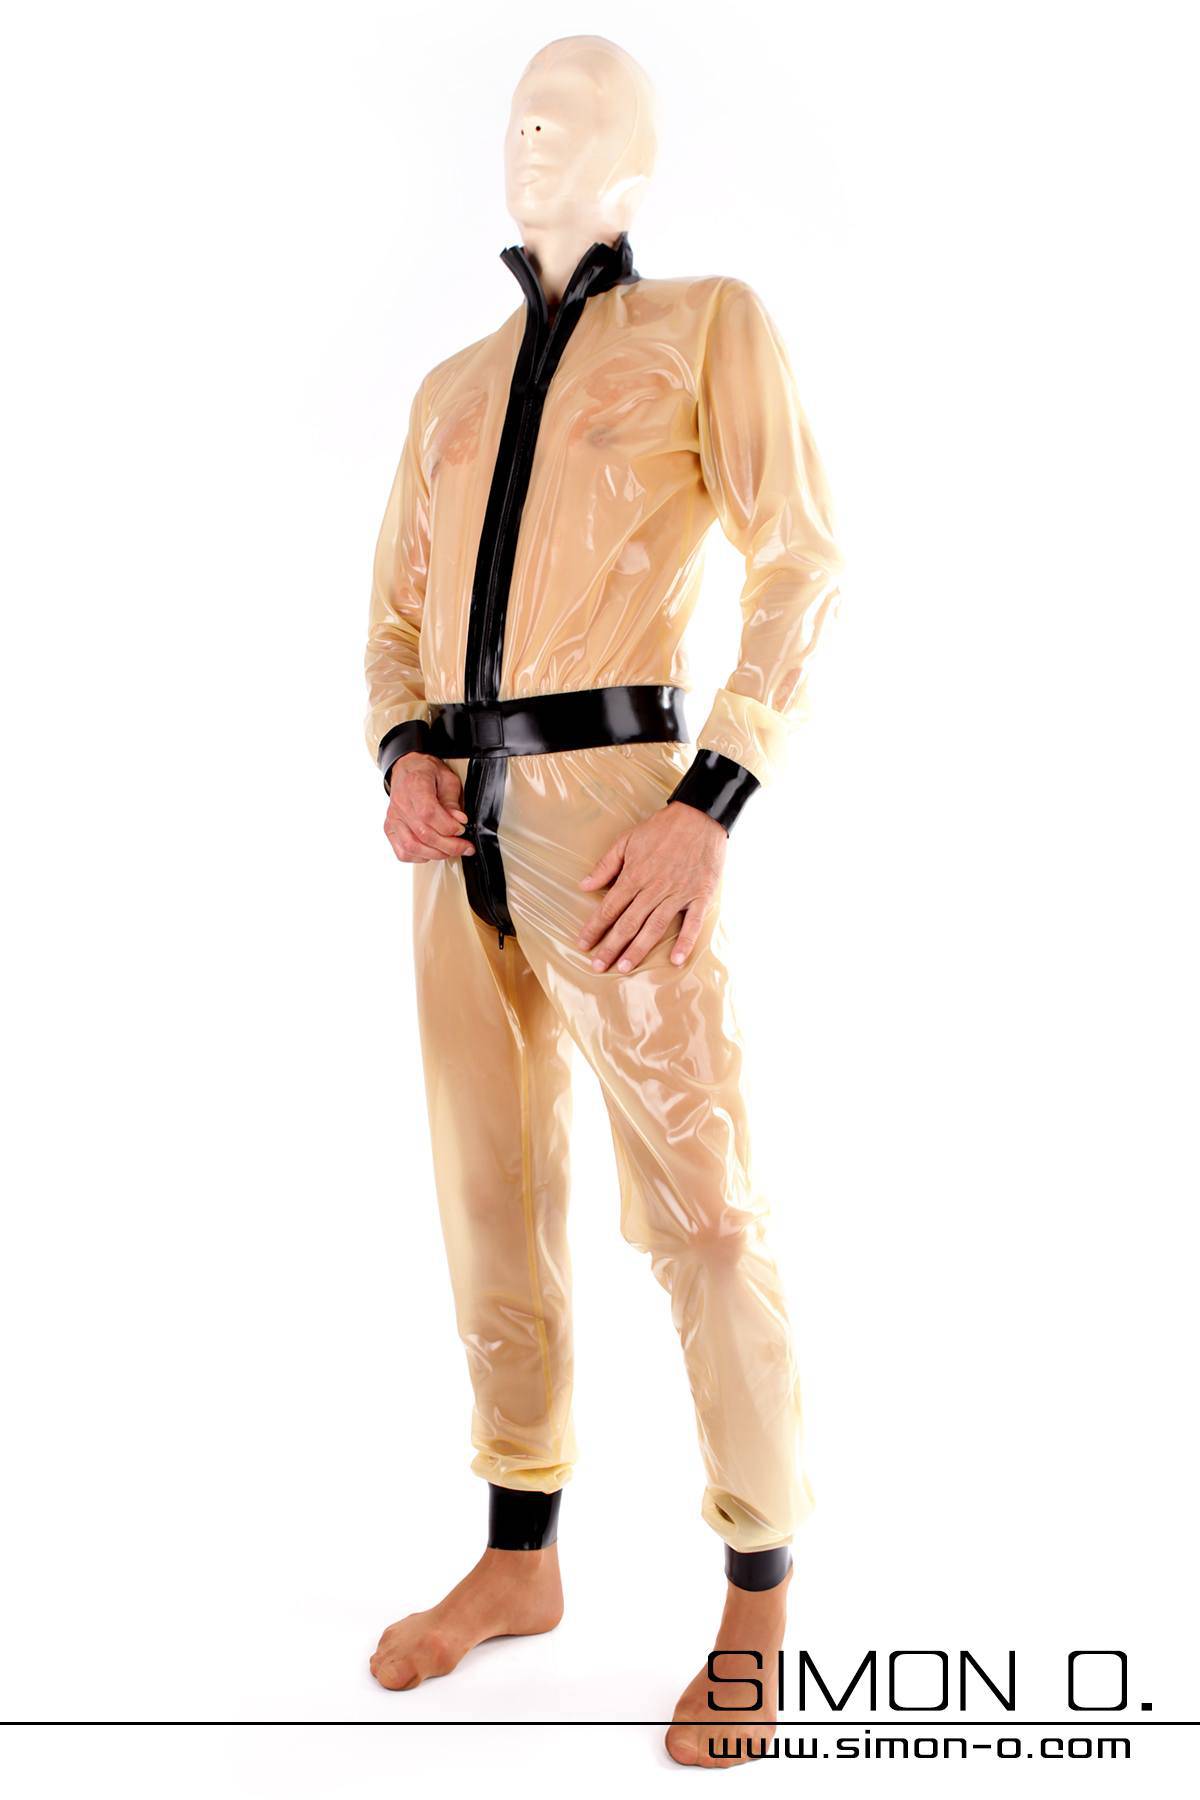 Latex suit to feel good - Perfect house suit or pyjamasuit